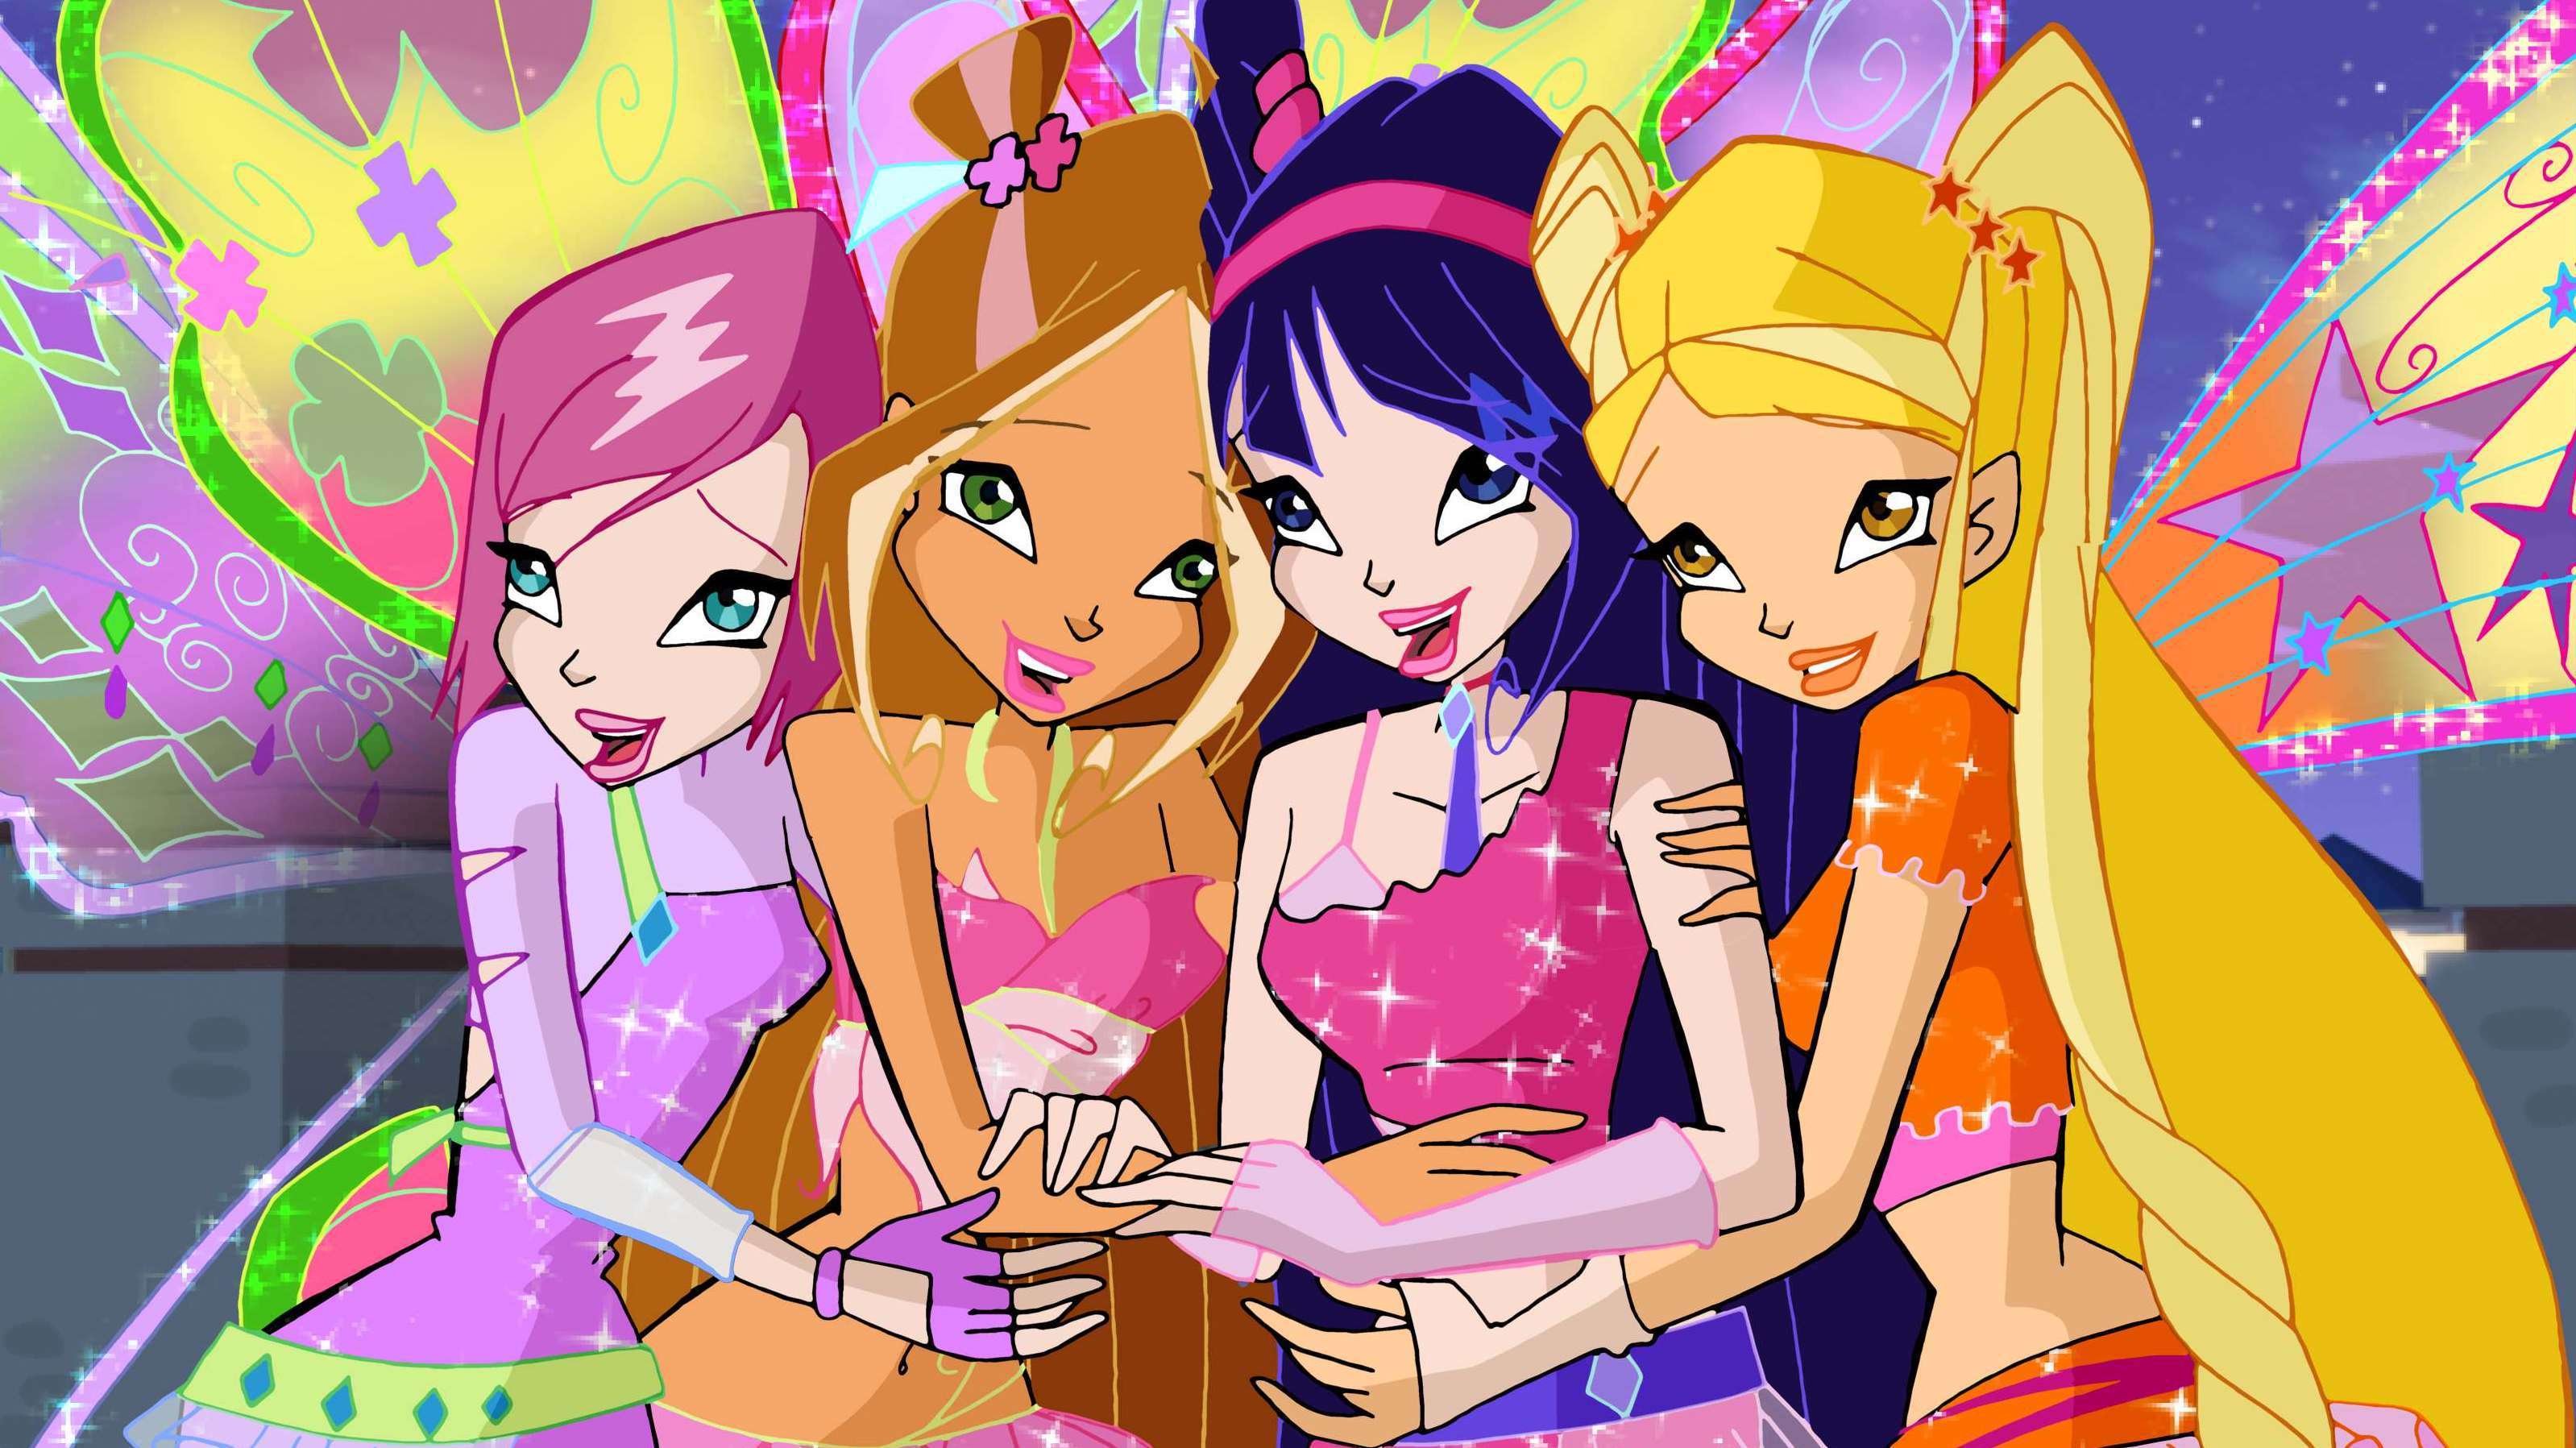 winx clup princess picture, winx clup princess wallpaper